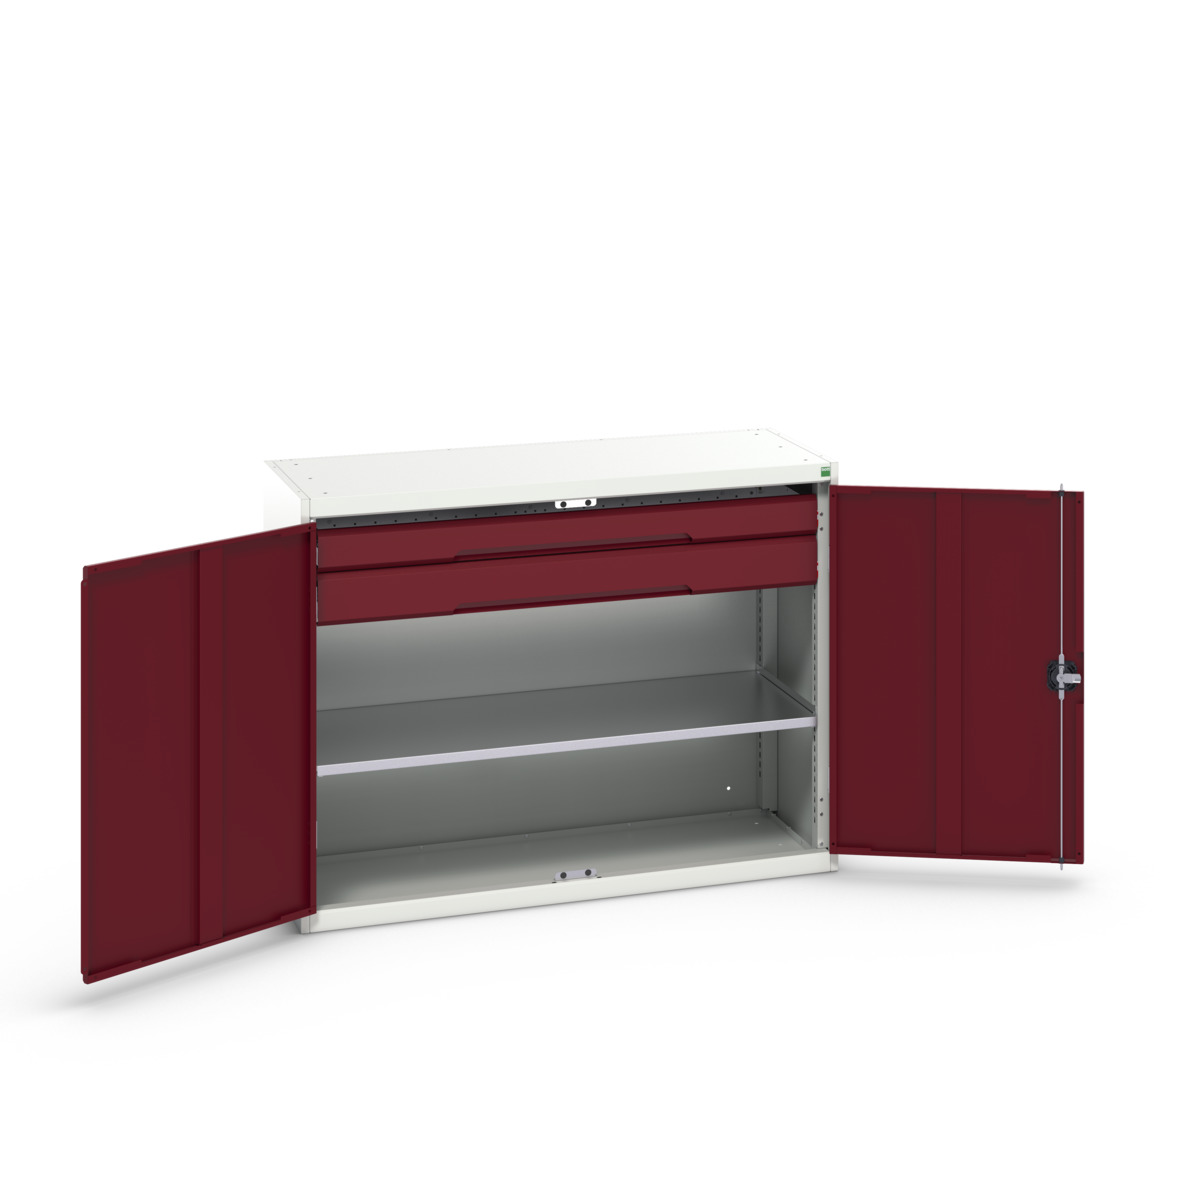 16926605.24 - verso kitted cupboard